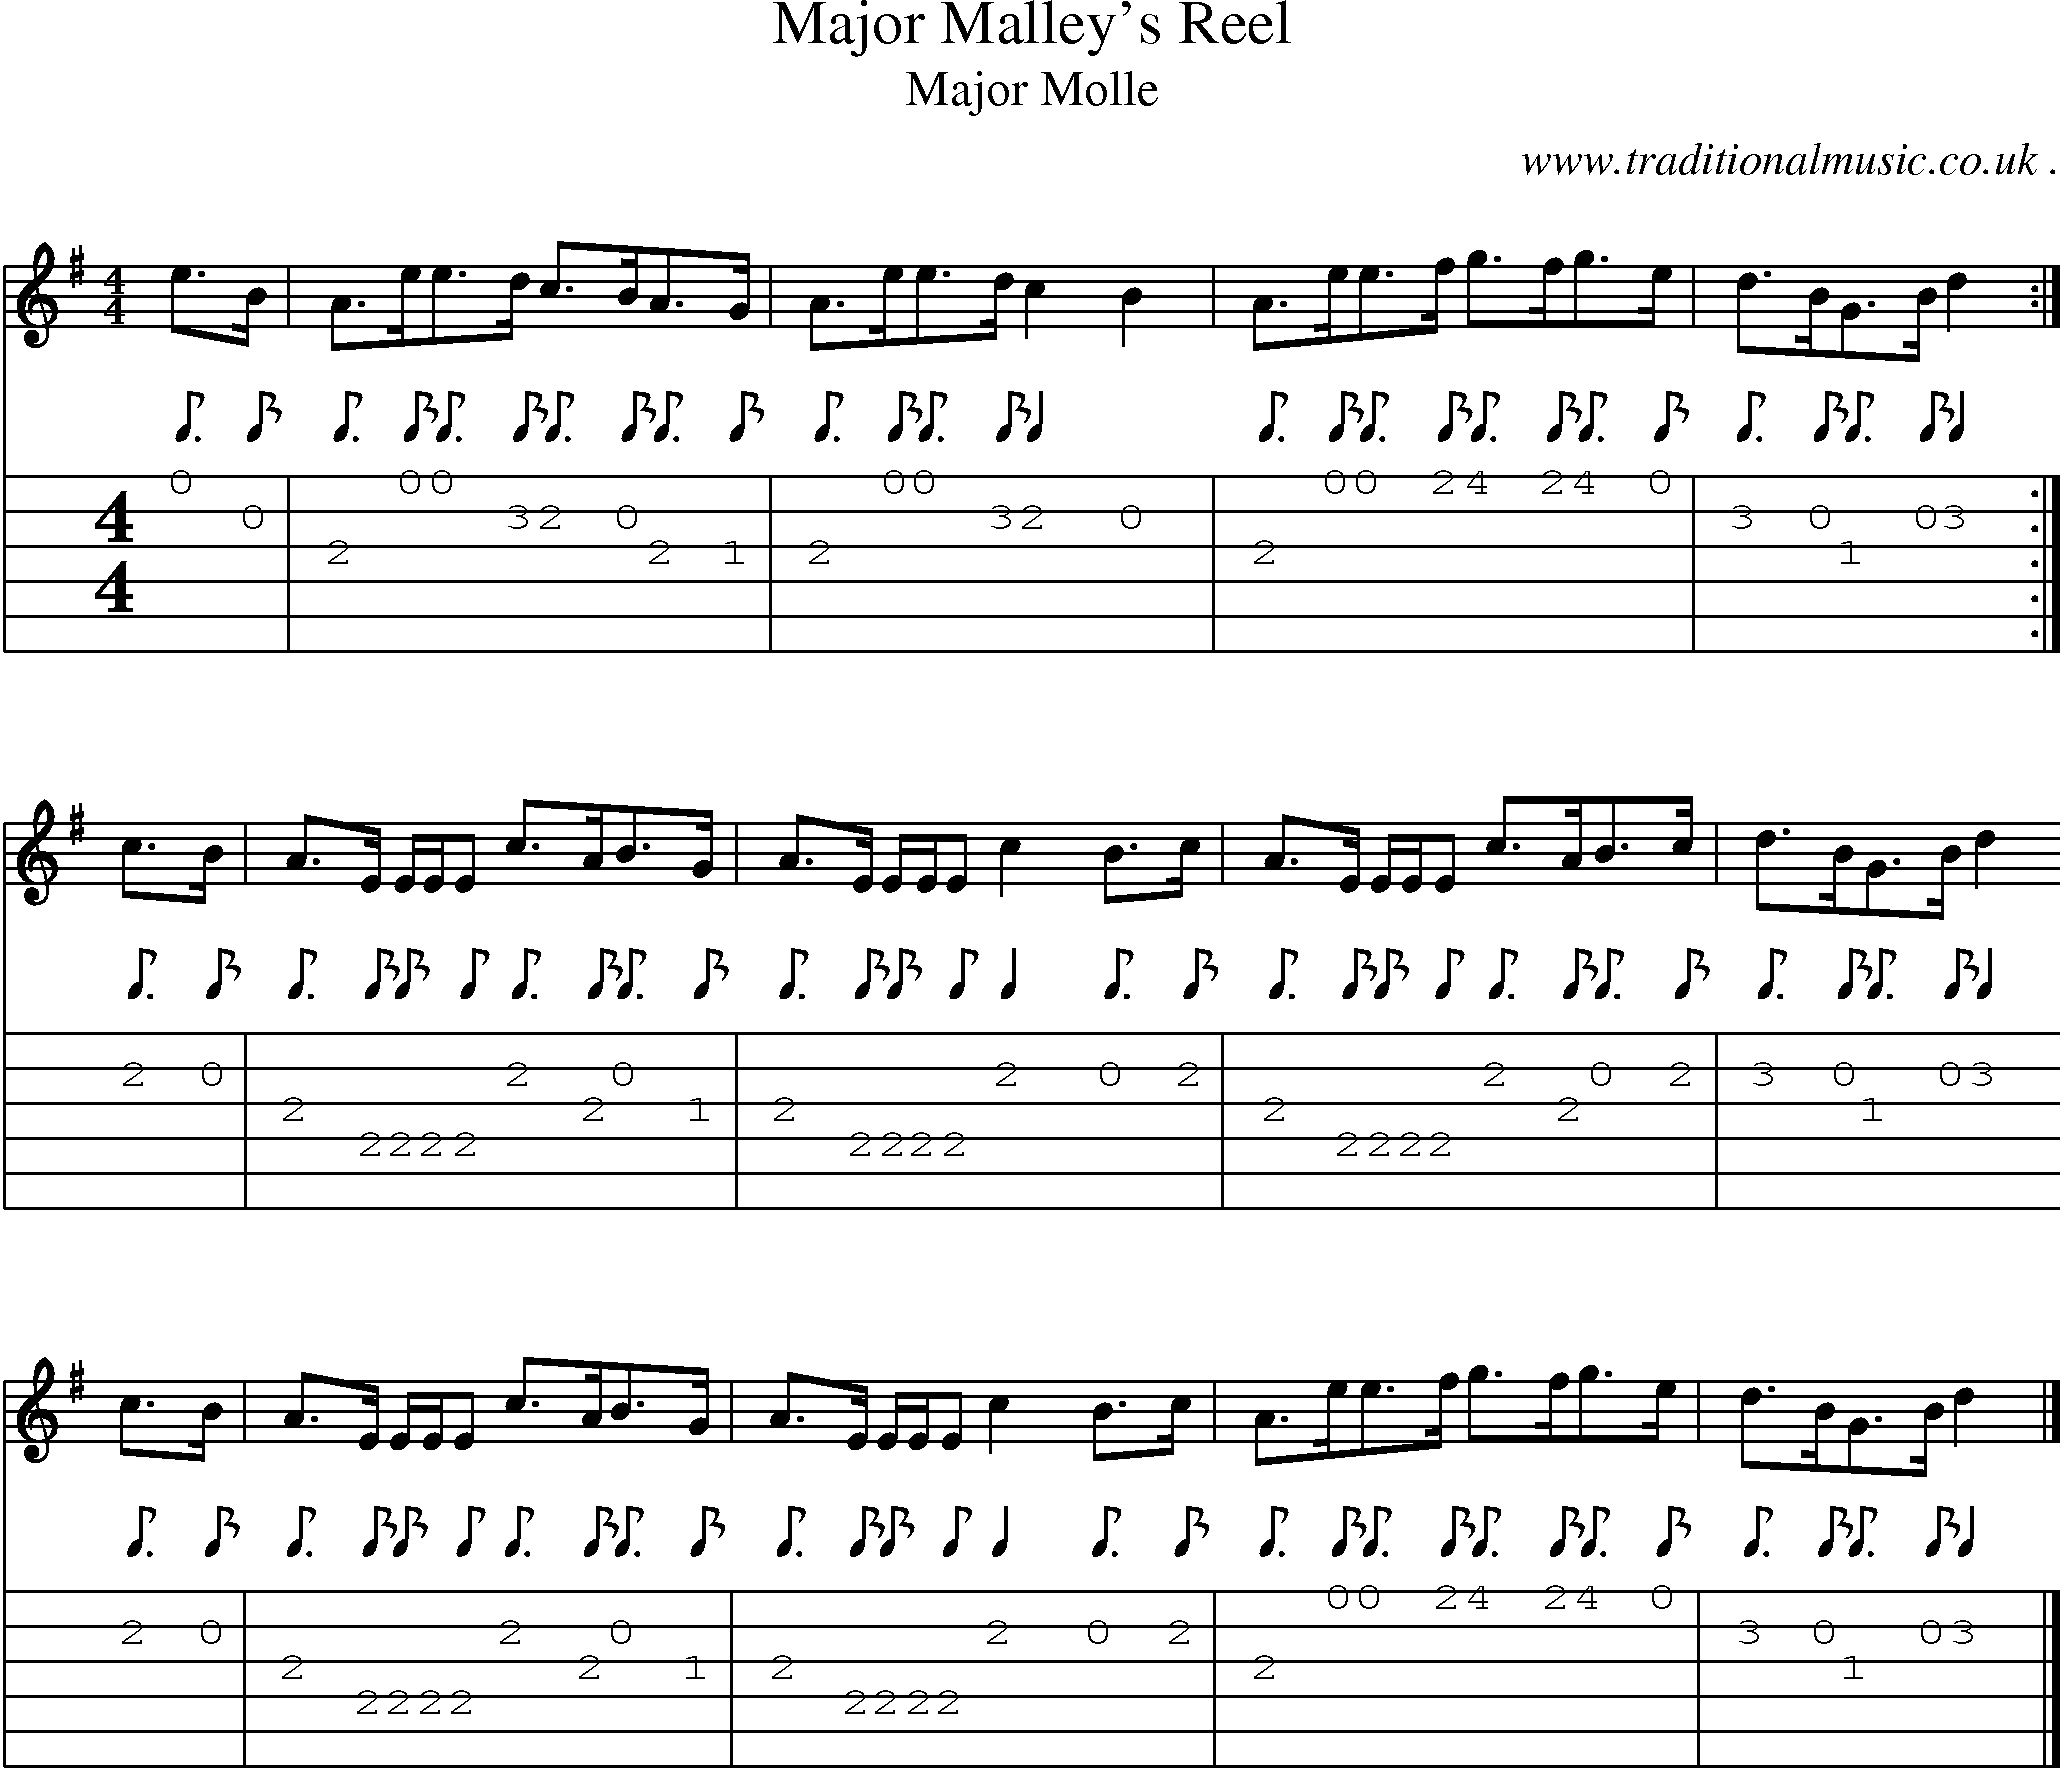 Sheet-music  score, Chords and Guitar Tabs for Major Malleys Reel